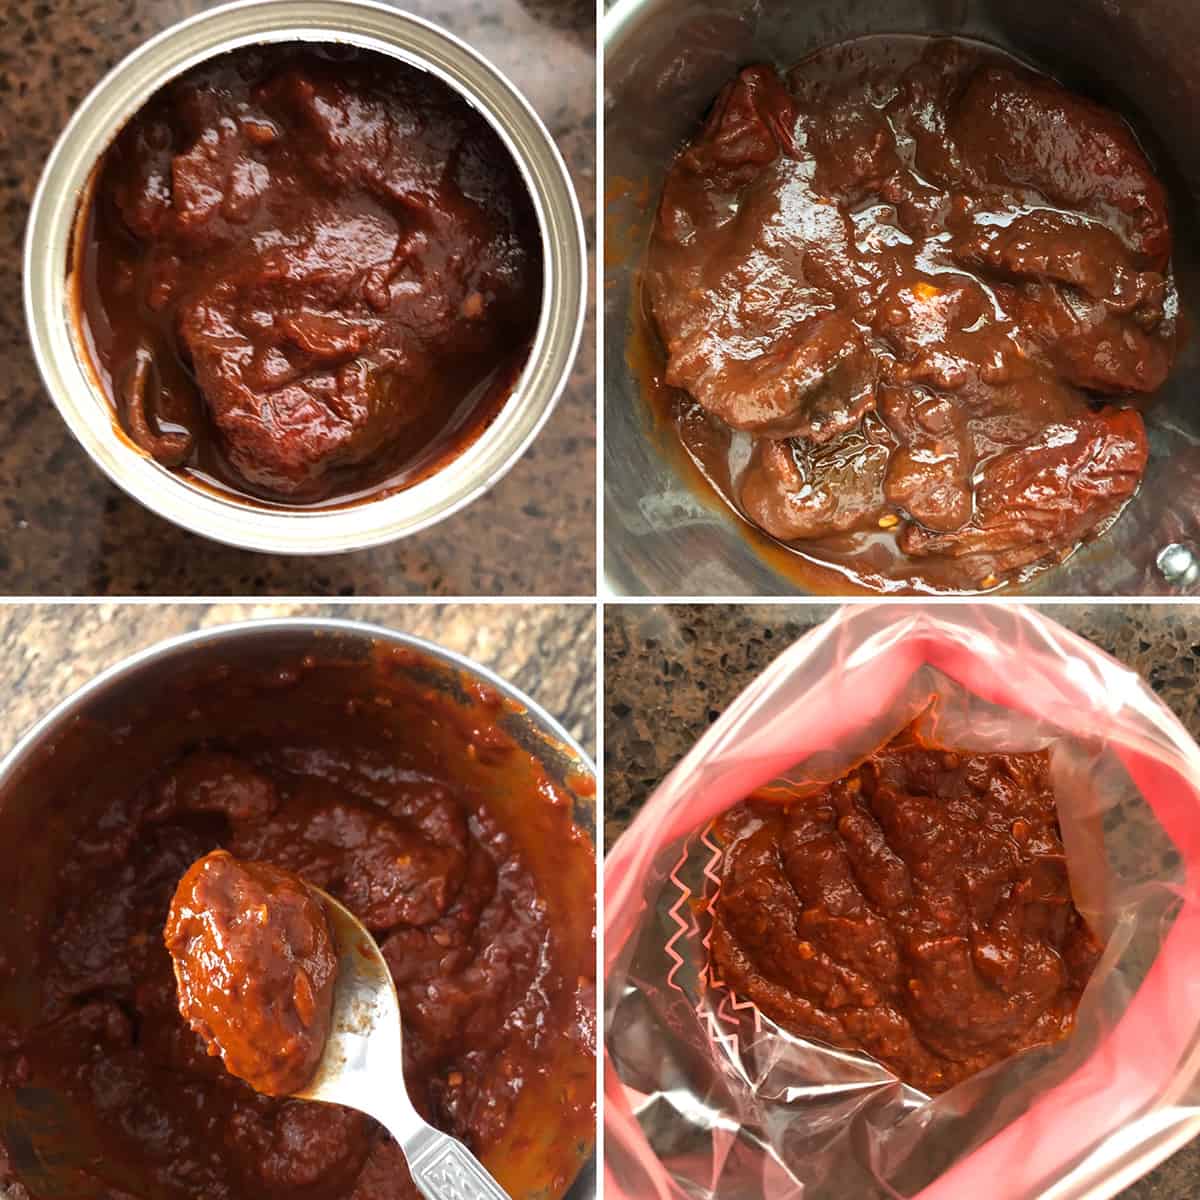 Photos showing how to freeze chipotle chilis in adobo sauce